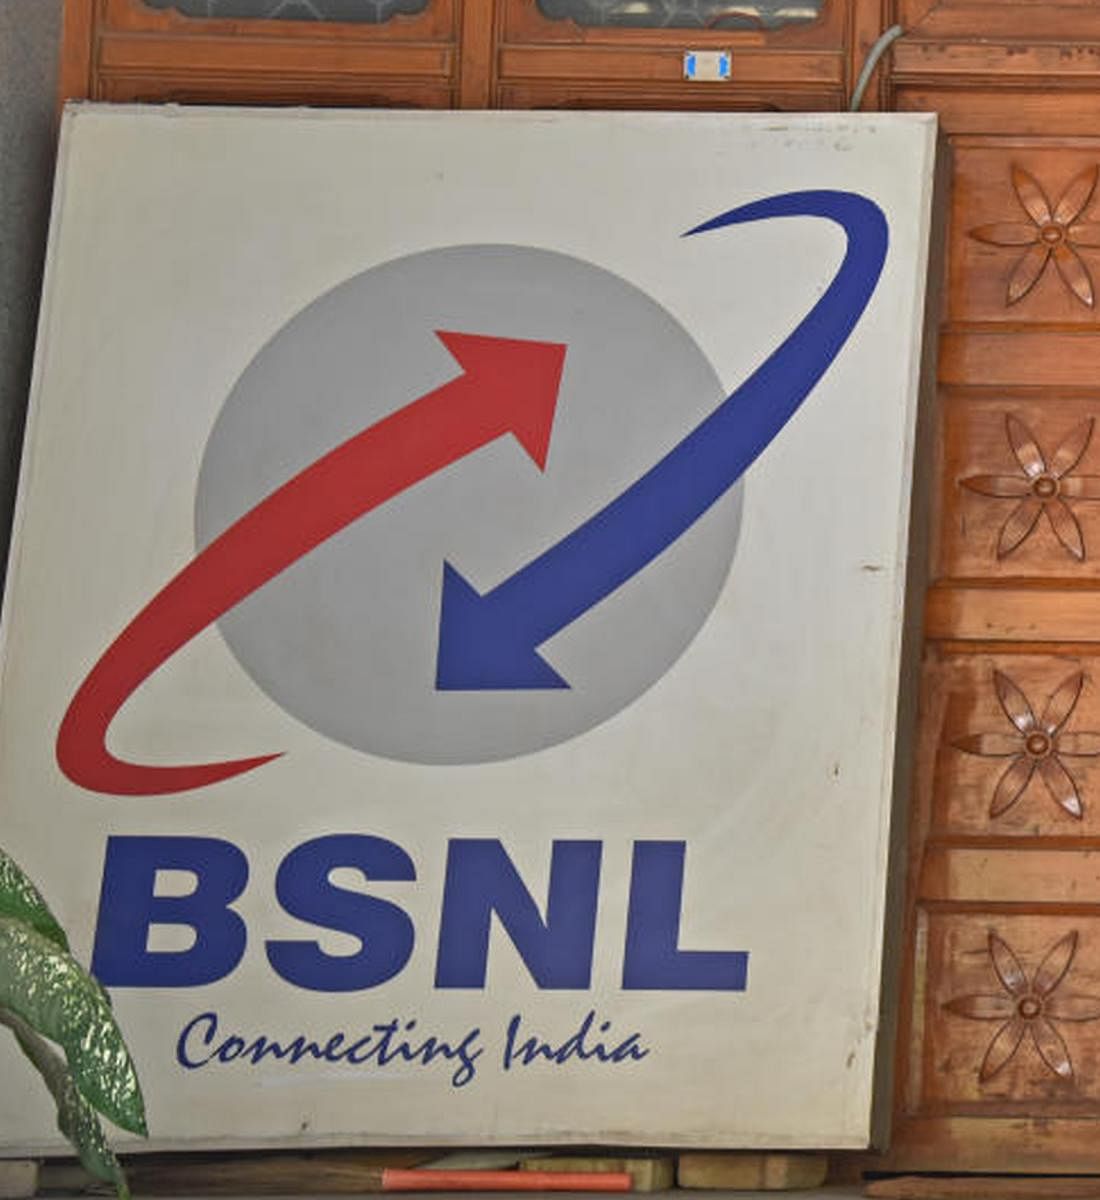 The government asked the BSNL to reduce the dependence on the Shenzhen-based ZTE which is servicing six areas of the BSNL. Credit: Representative image/Credit: DH File Photo